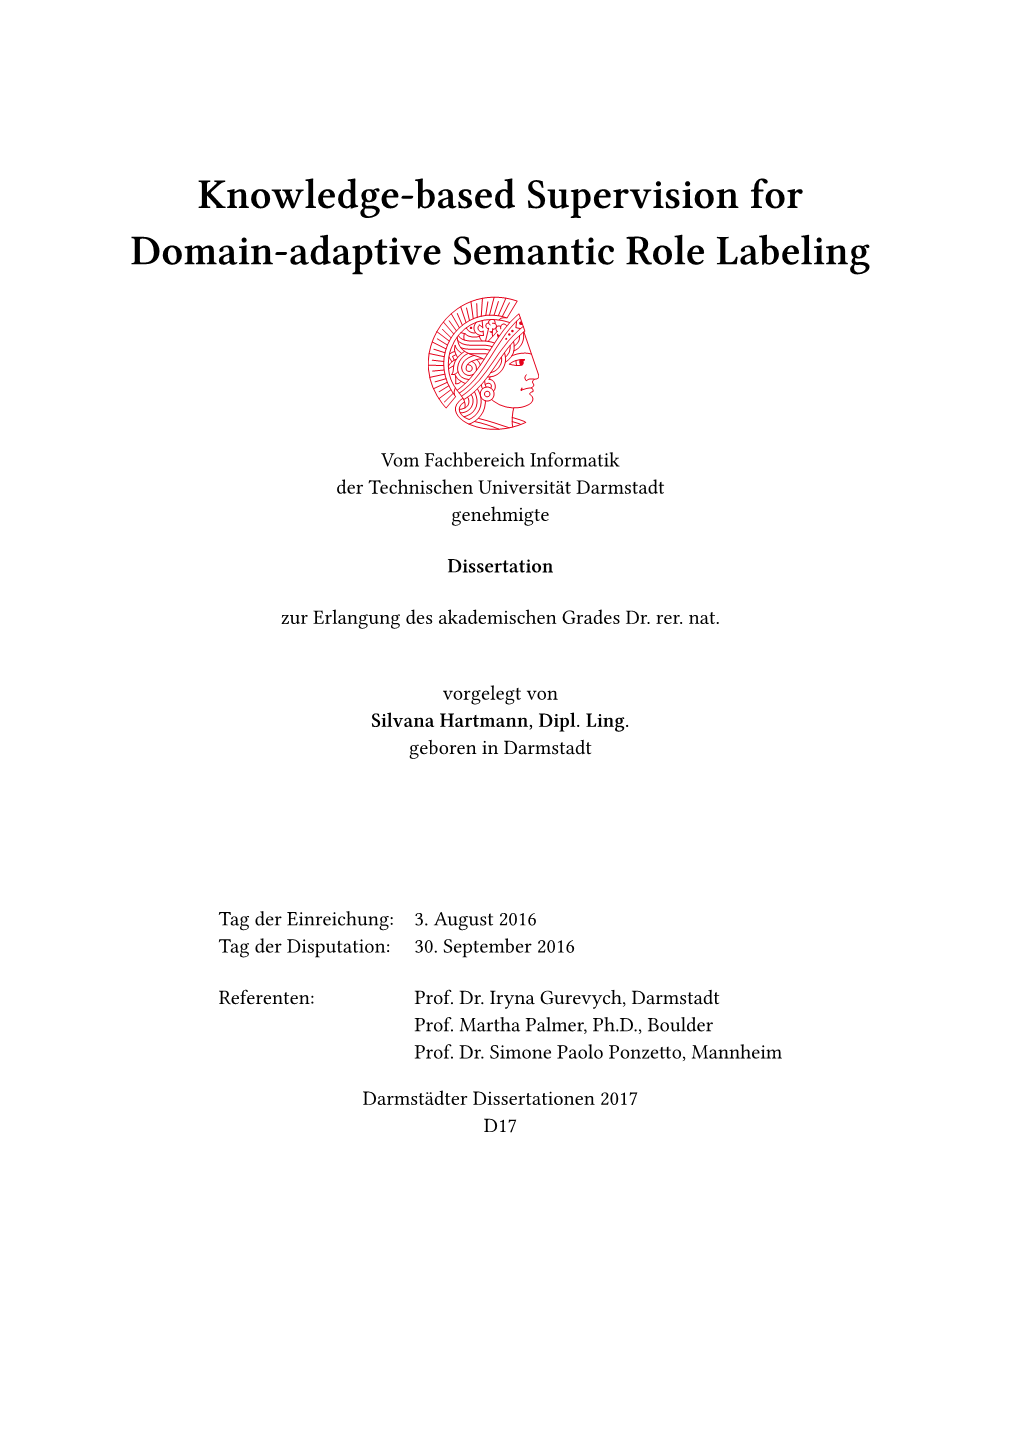 Knowledge-Based Supervision for Domain-Adaptive Semantic Role Labeling